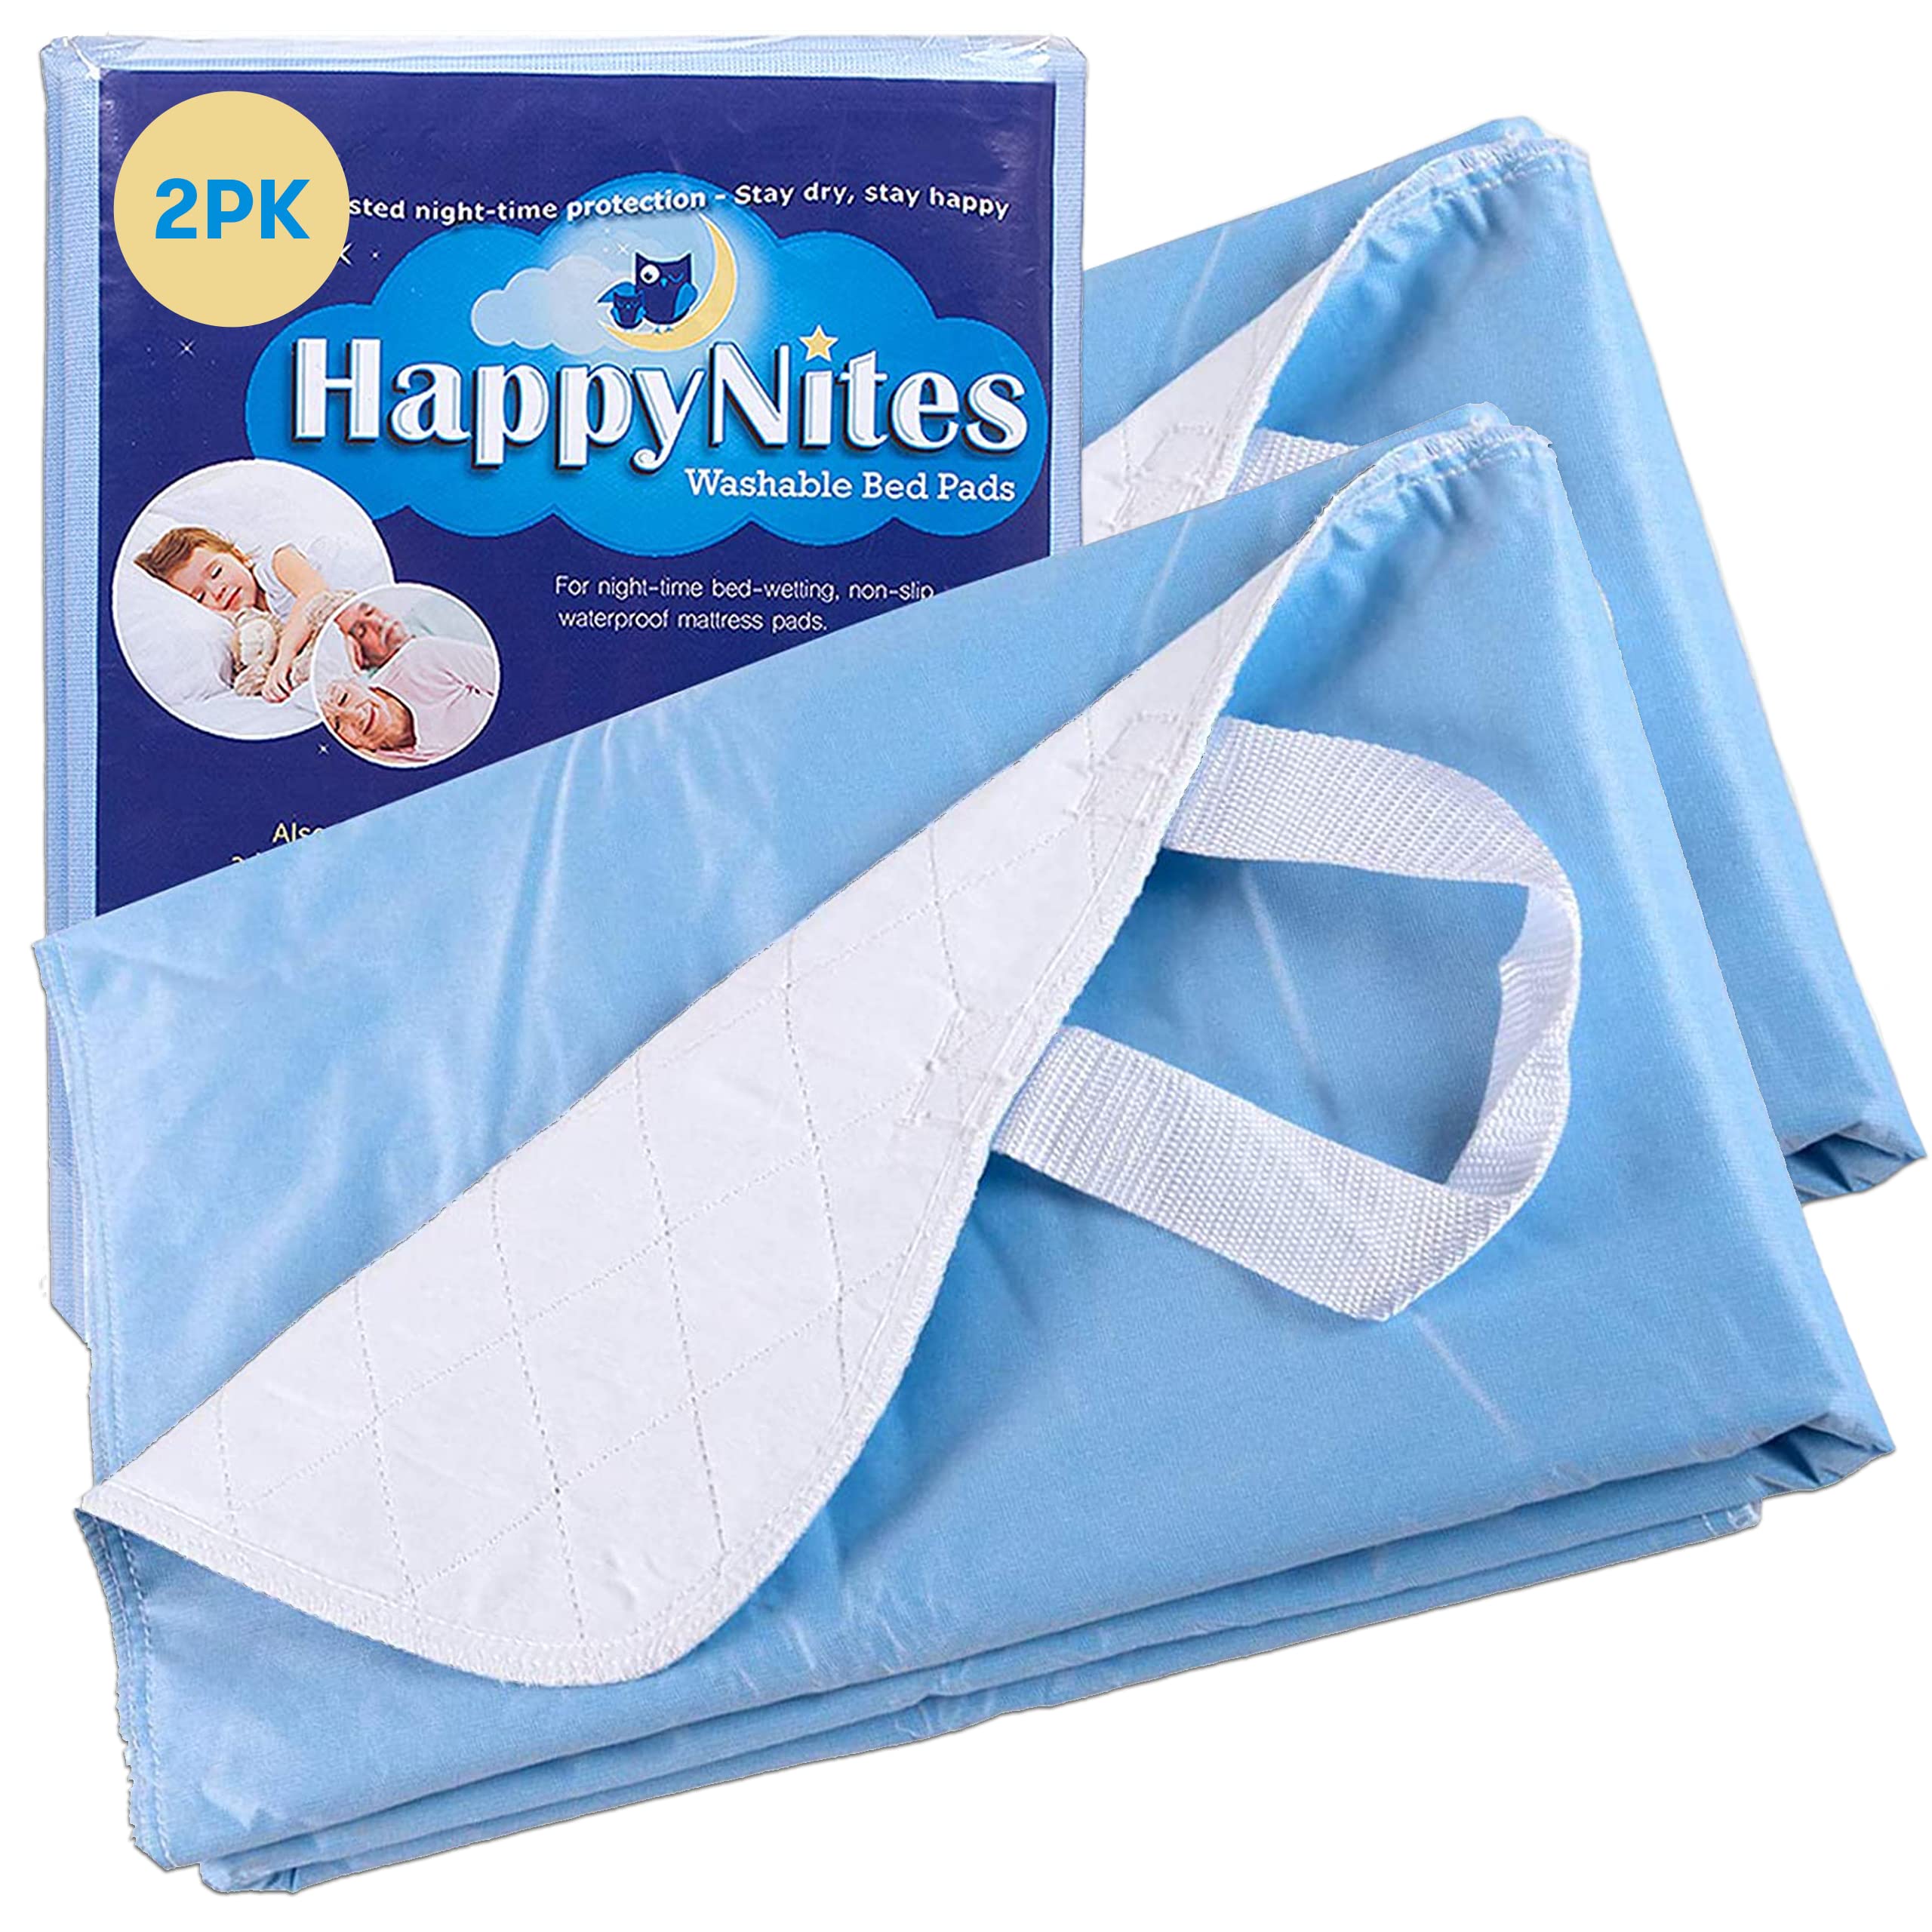 Buddies Reusable Incontinence Bed Pads/Toilet Training Bed